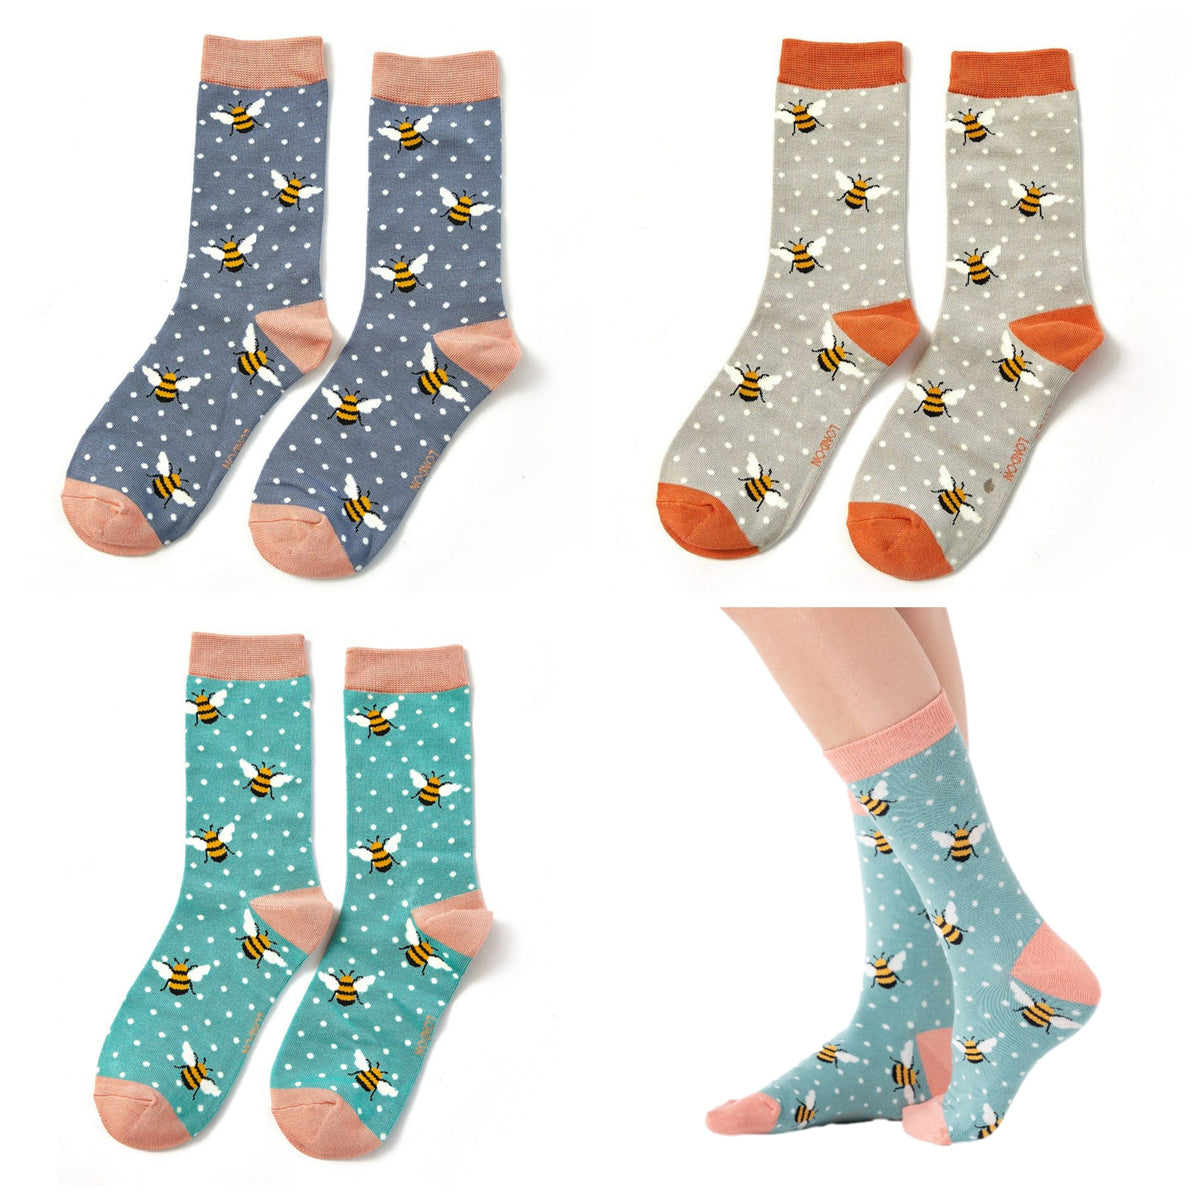 Miss Sparrow Bamboo Socks for Women - Bumble Bees Composite